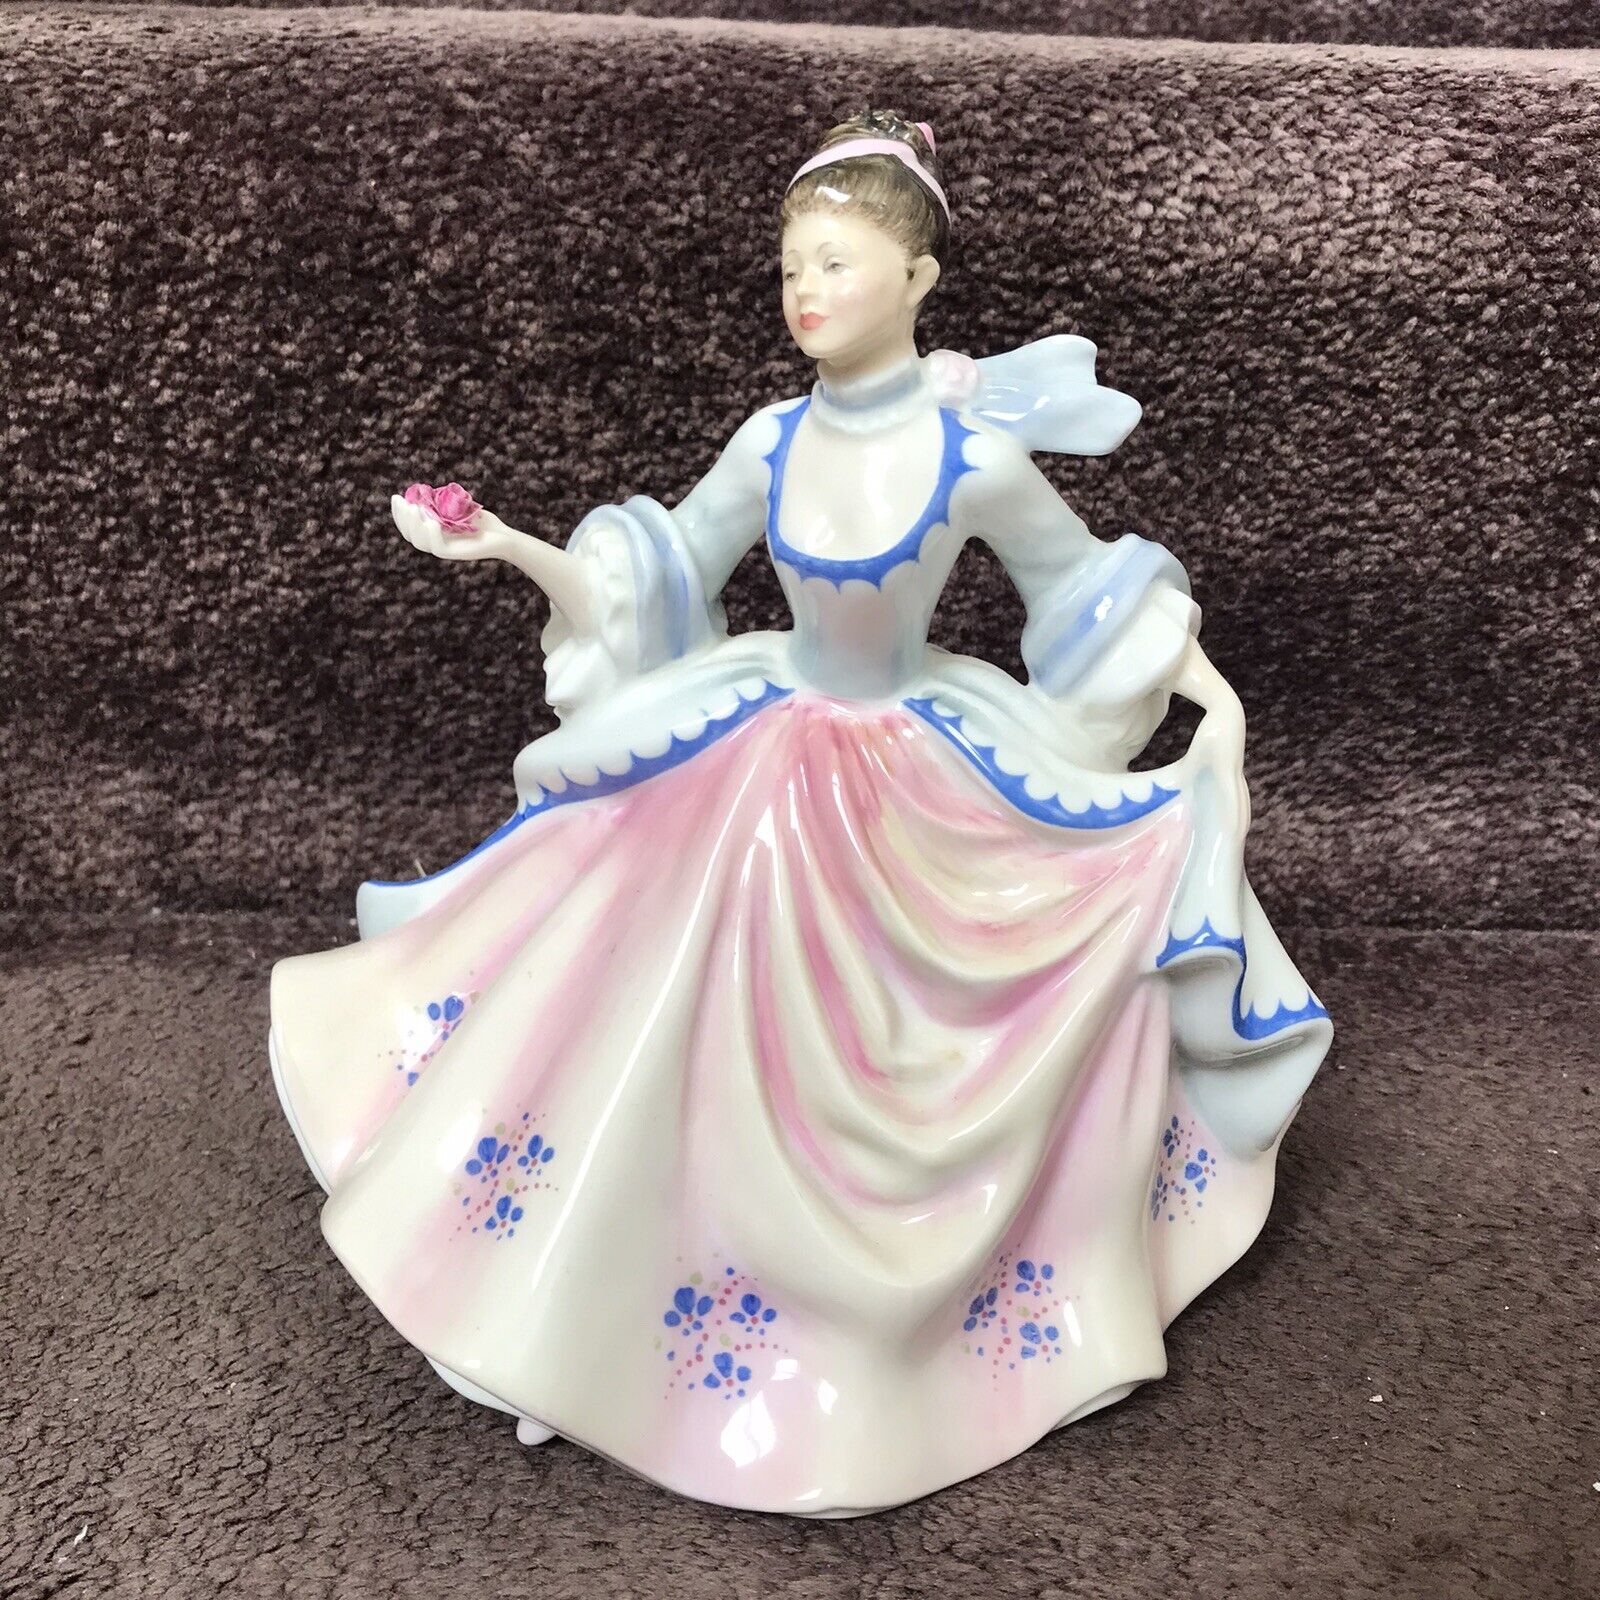 VINTAGE ROYAL DOULTON REBECCA FIGURE IN EXCELLENT CONDITION 2805 with box